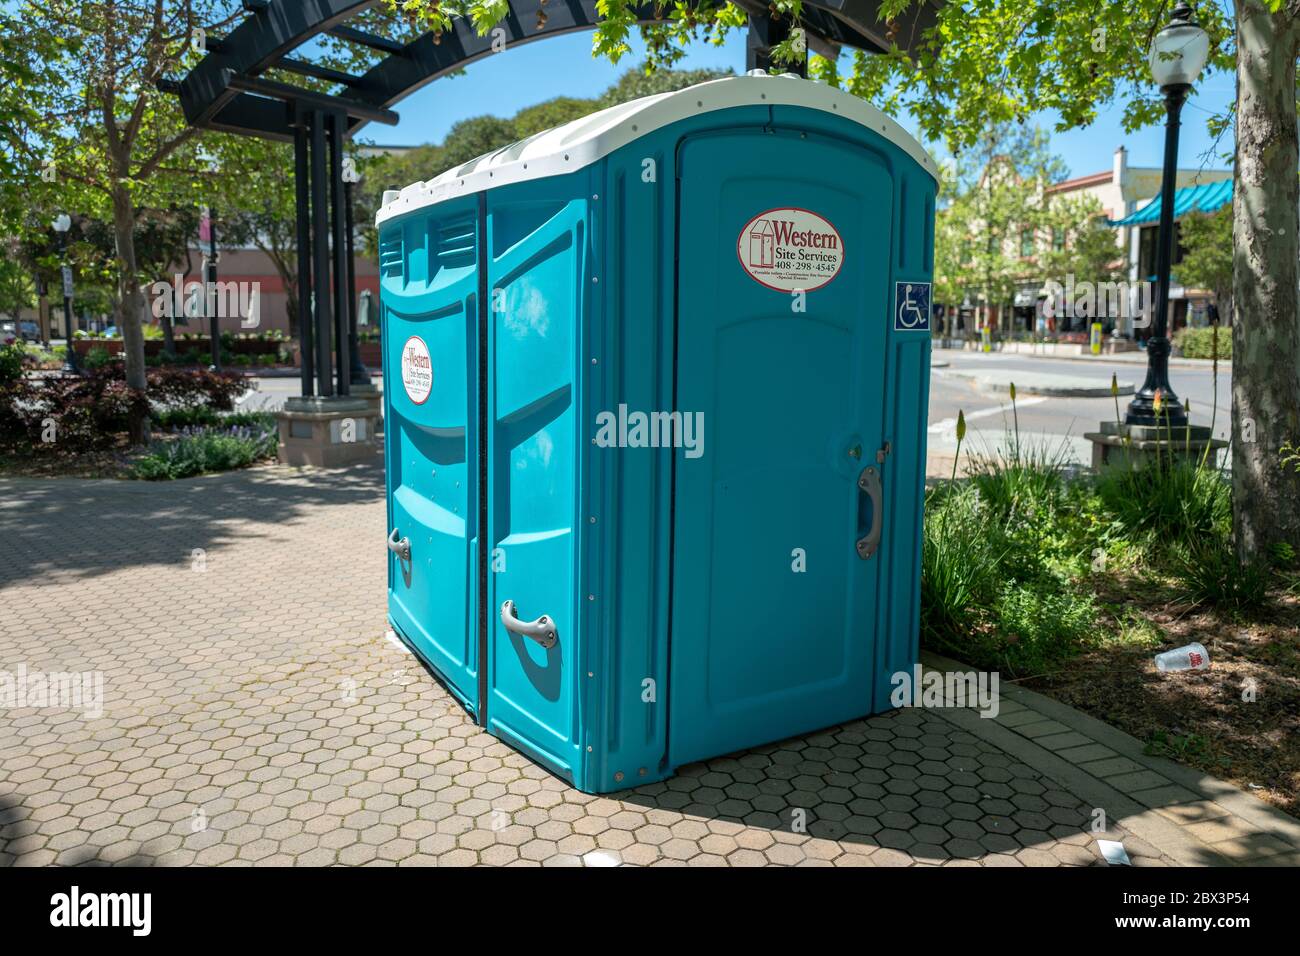 Portable restrooms are visible in the Silicon Valley, Mountain View, California during an outbreak of the COVID-19 coronavirus, April 24, 2020. With laws prohibiting the use of many restaurant and other public restrooms, many cities have installed temporary facilities for the homeless, essential workers, and others. () Stock Photo